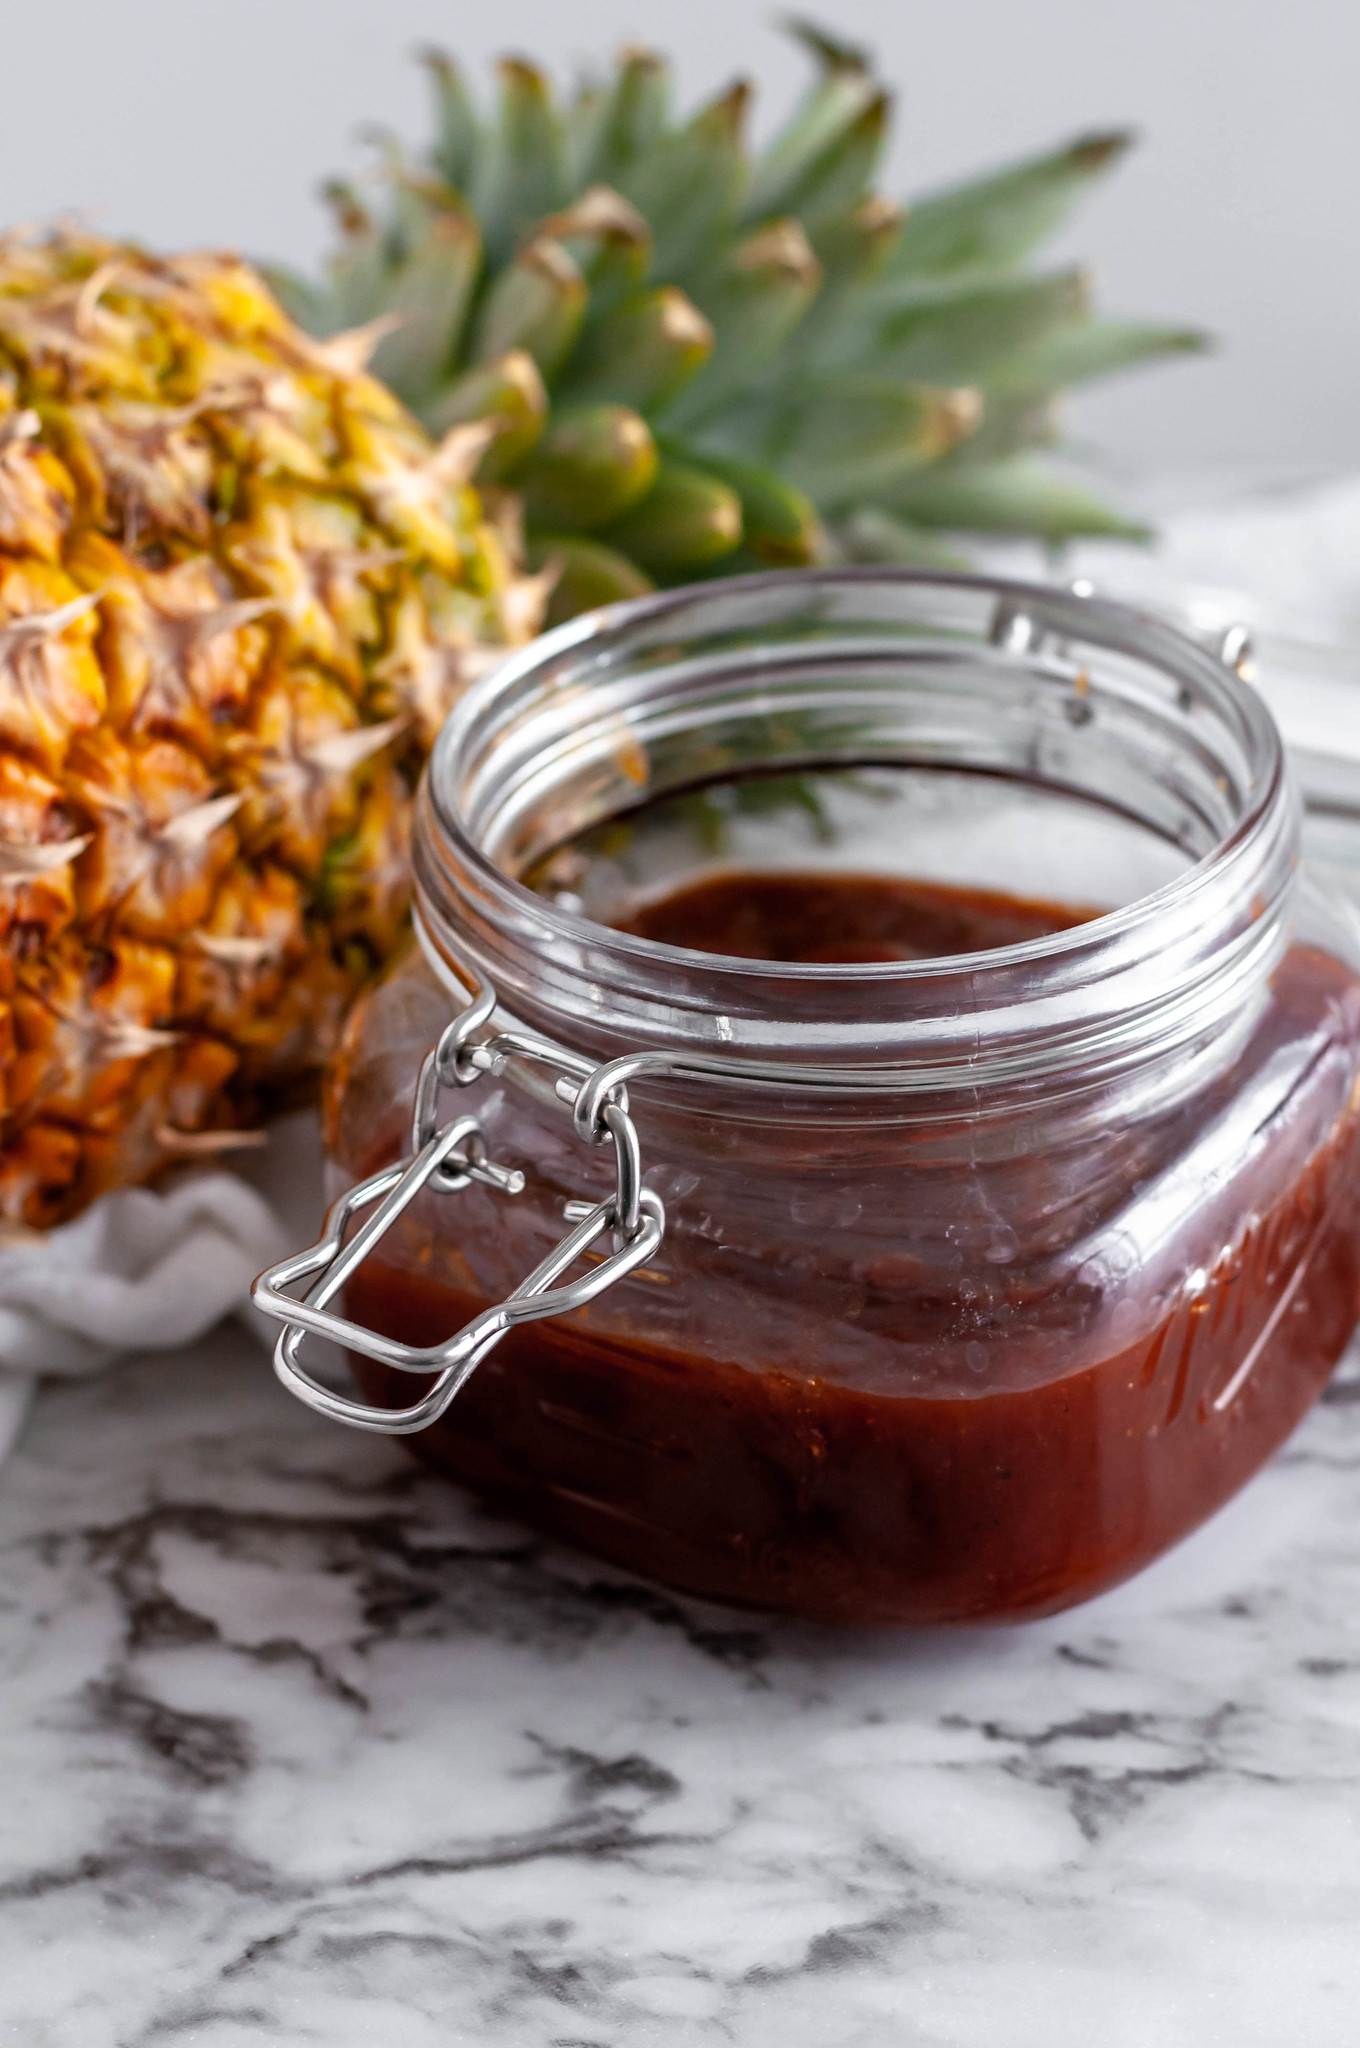 Pineapple BBQ Sauce is sweet, tangy and super simple to make. All you need is a handful of ingredients and less than 30 minutes for a thick, sweet sauce.